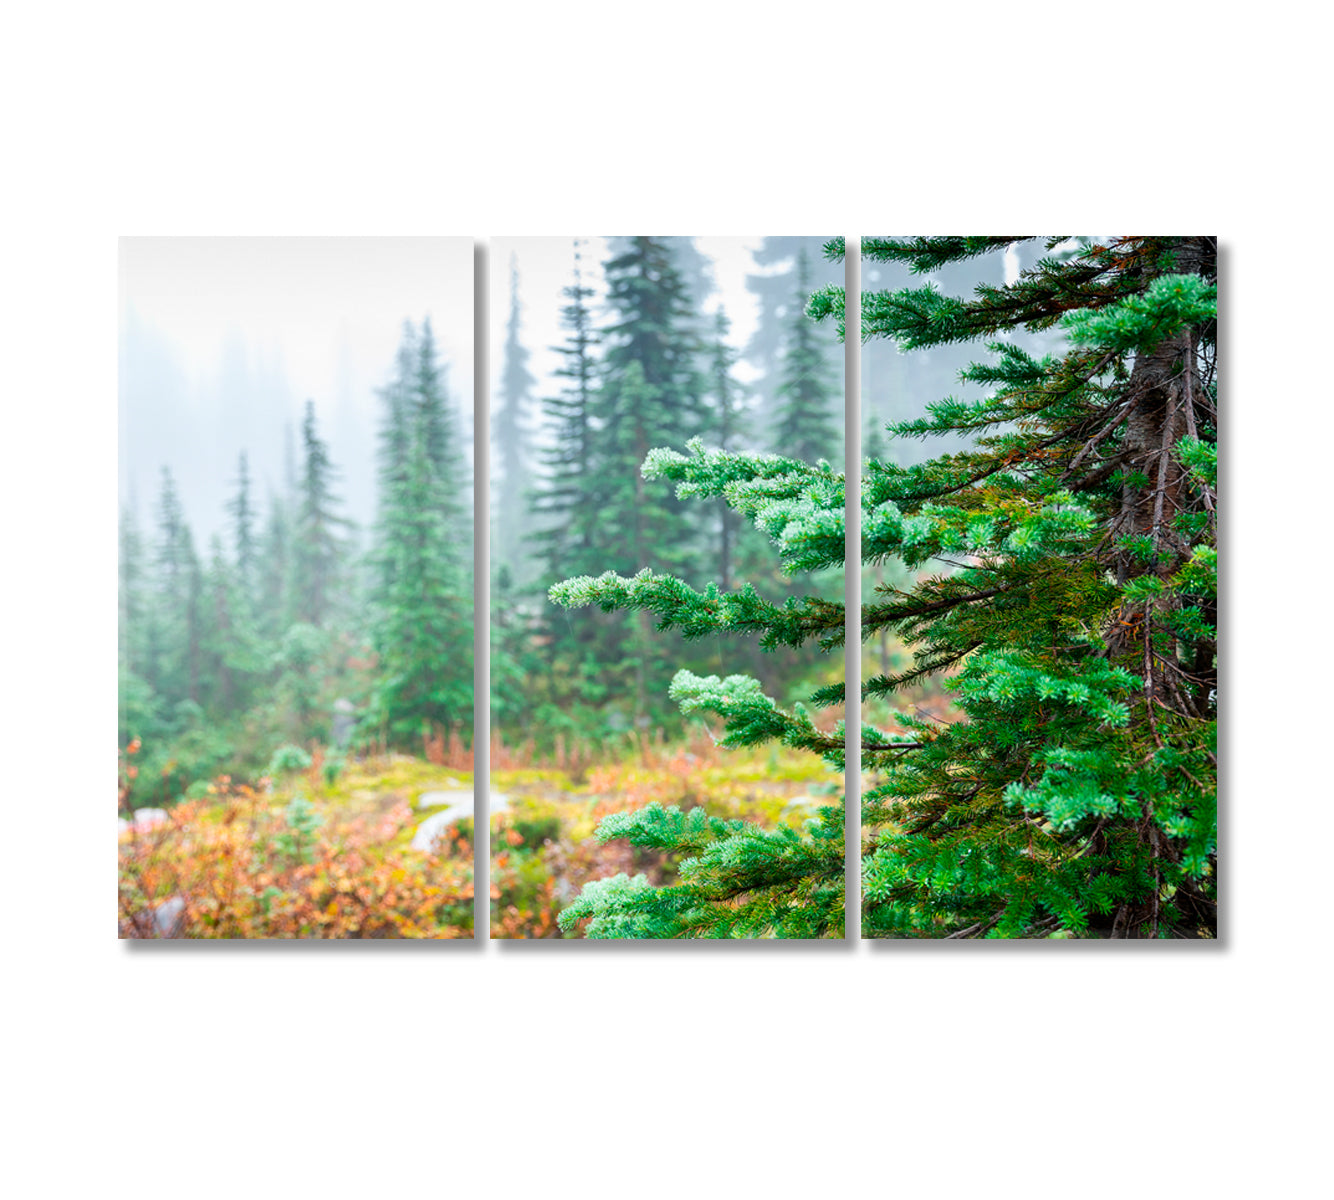 Green Pine Forest in Winter Canvas Print-Canvas Print-CetArt-3 Panels-36x24 inches-CetArt